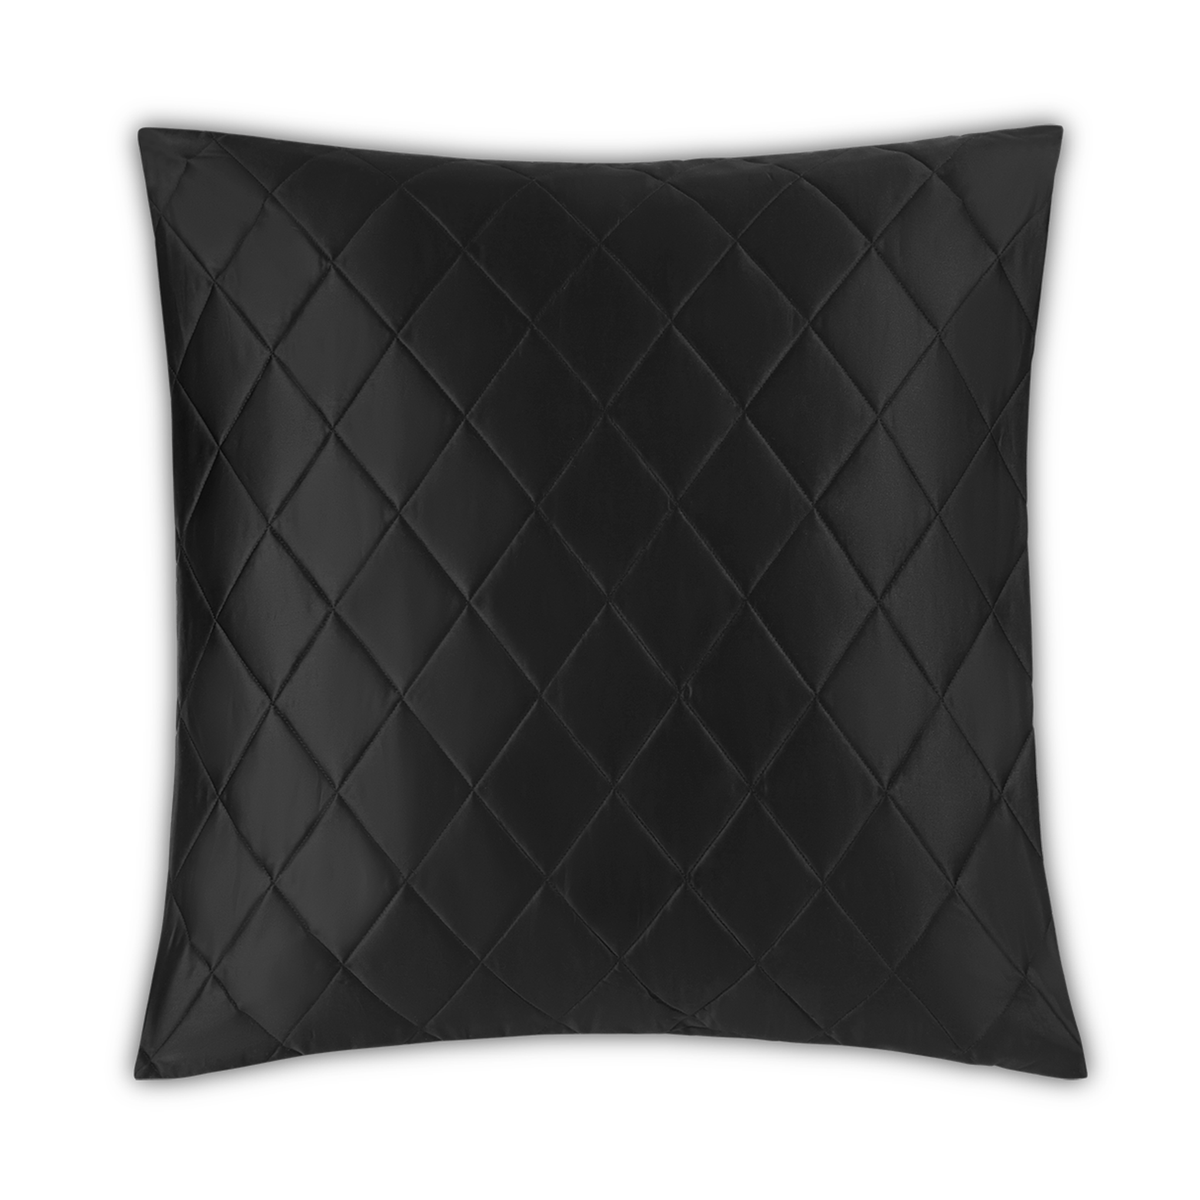 Silo Image of Matouk Nocturne Quilted Bedding Euro Sham in Black Color